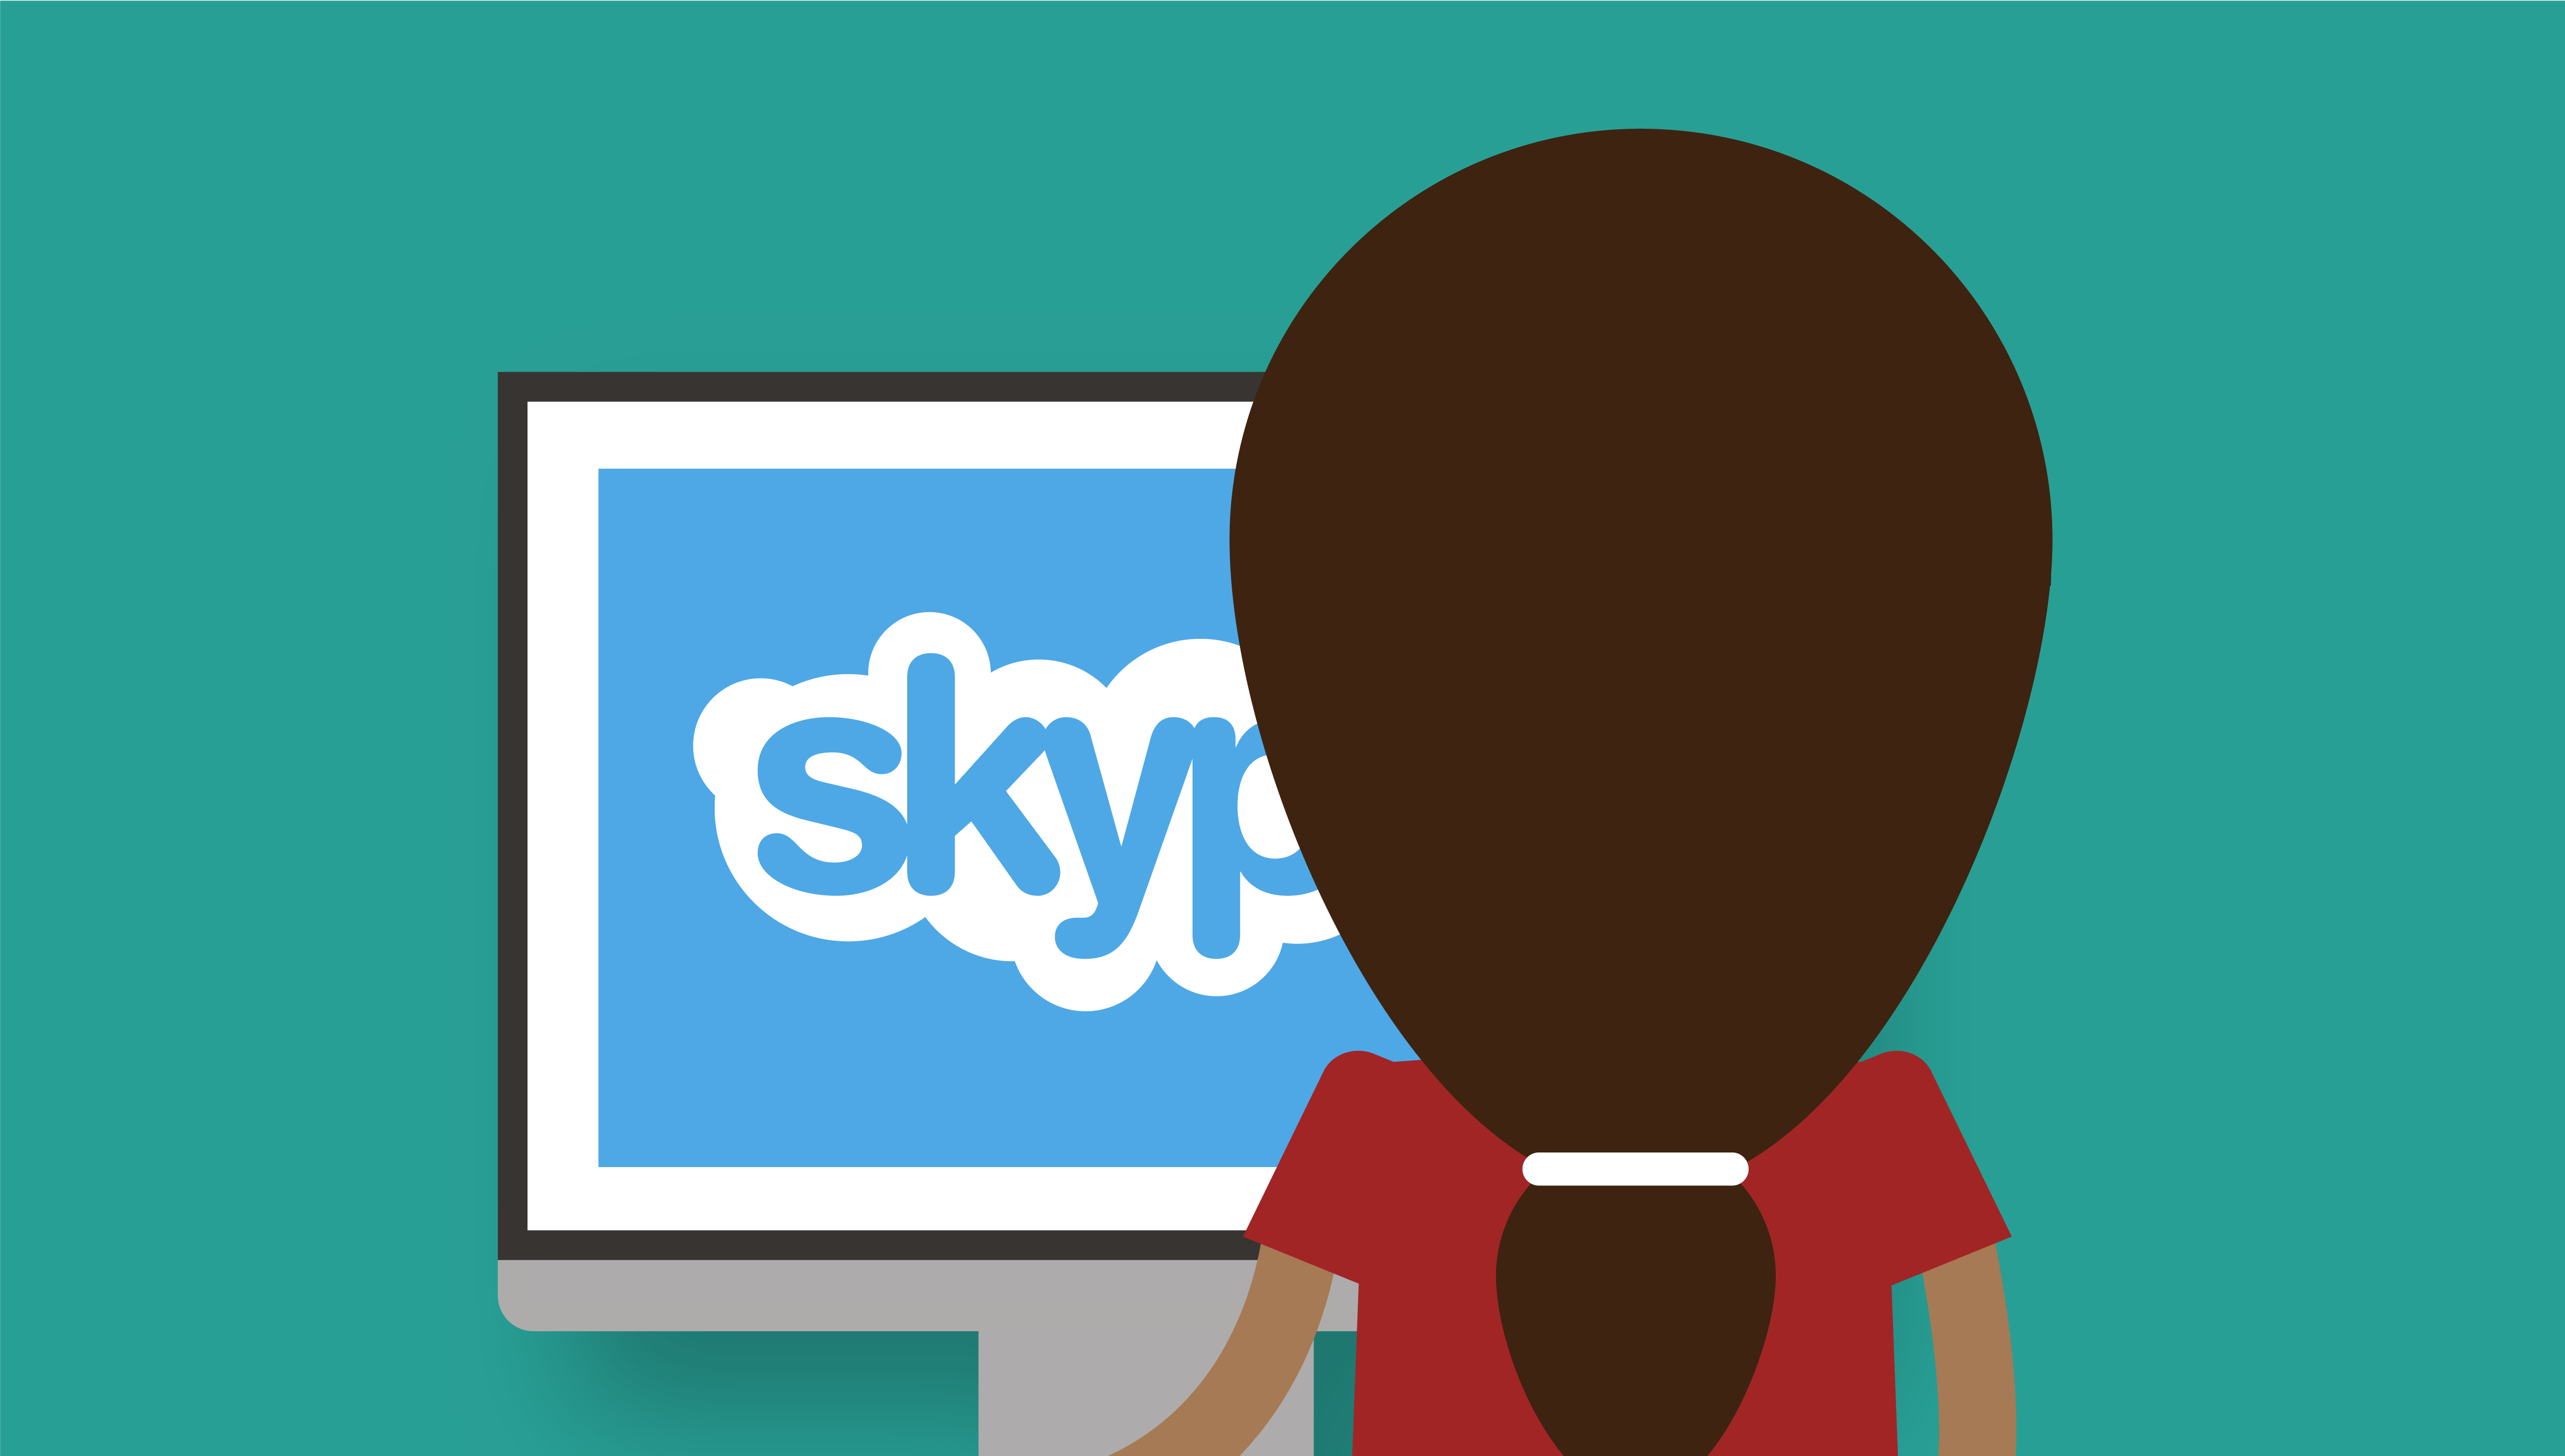 Illustrated graphic of a person looking at a computer screen with the Skype logo displayed